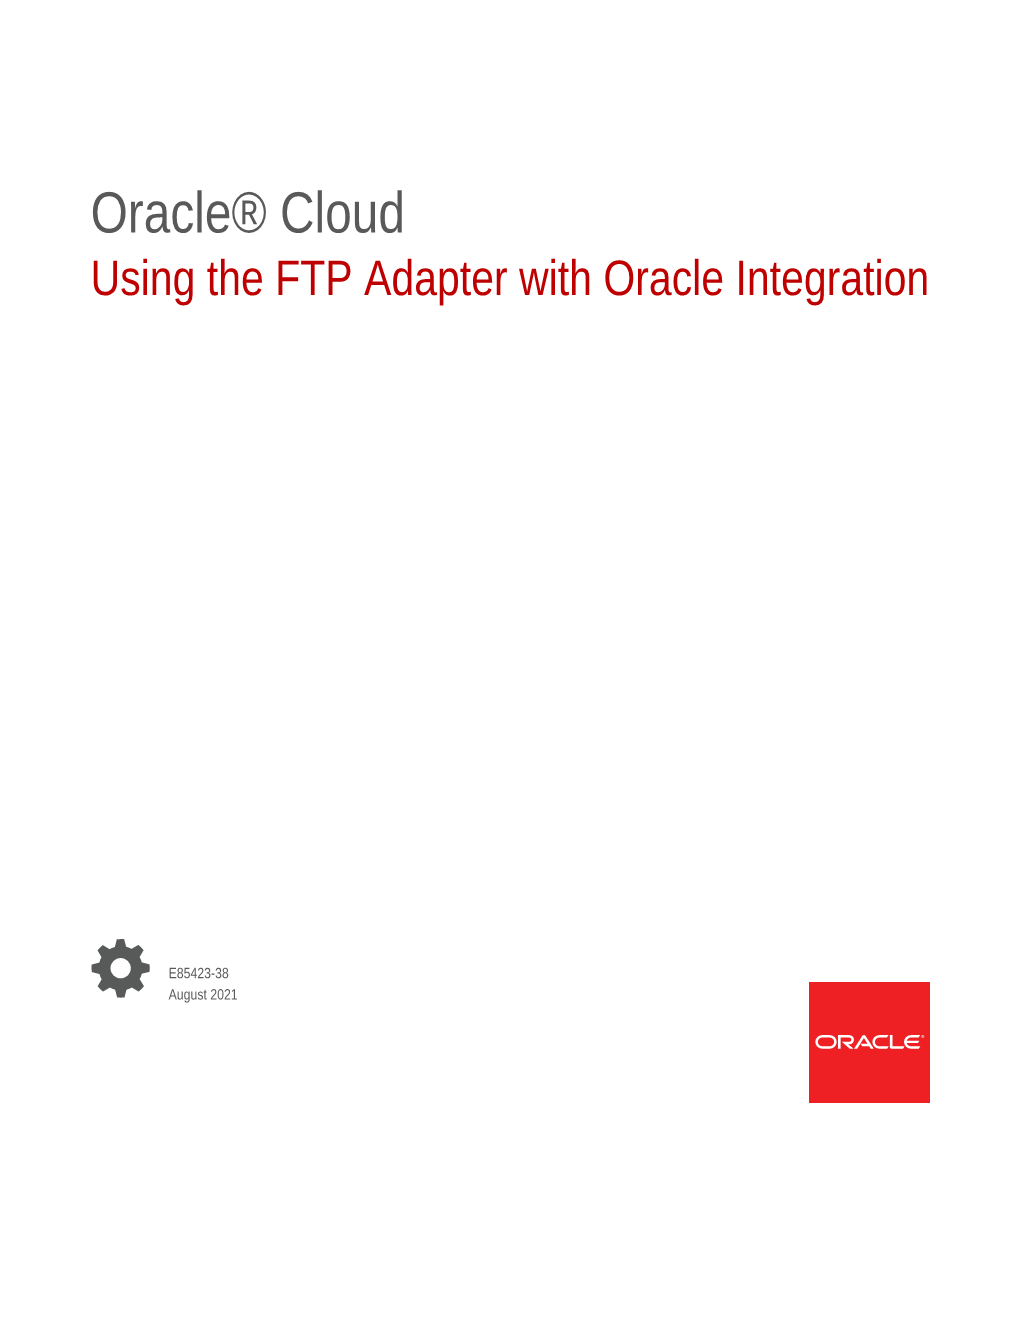 Using the FTP Adapter with Oracle Integration